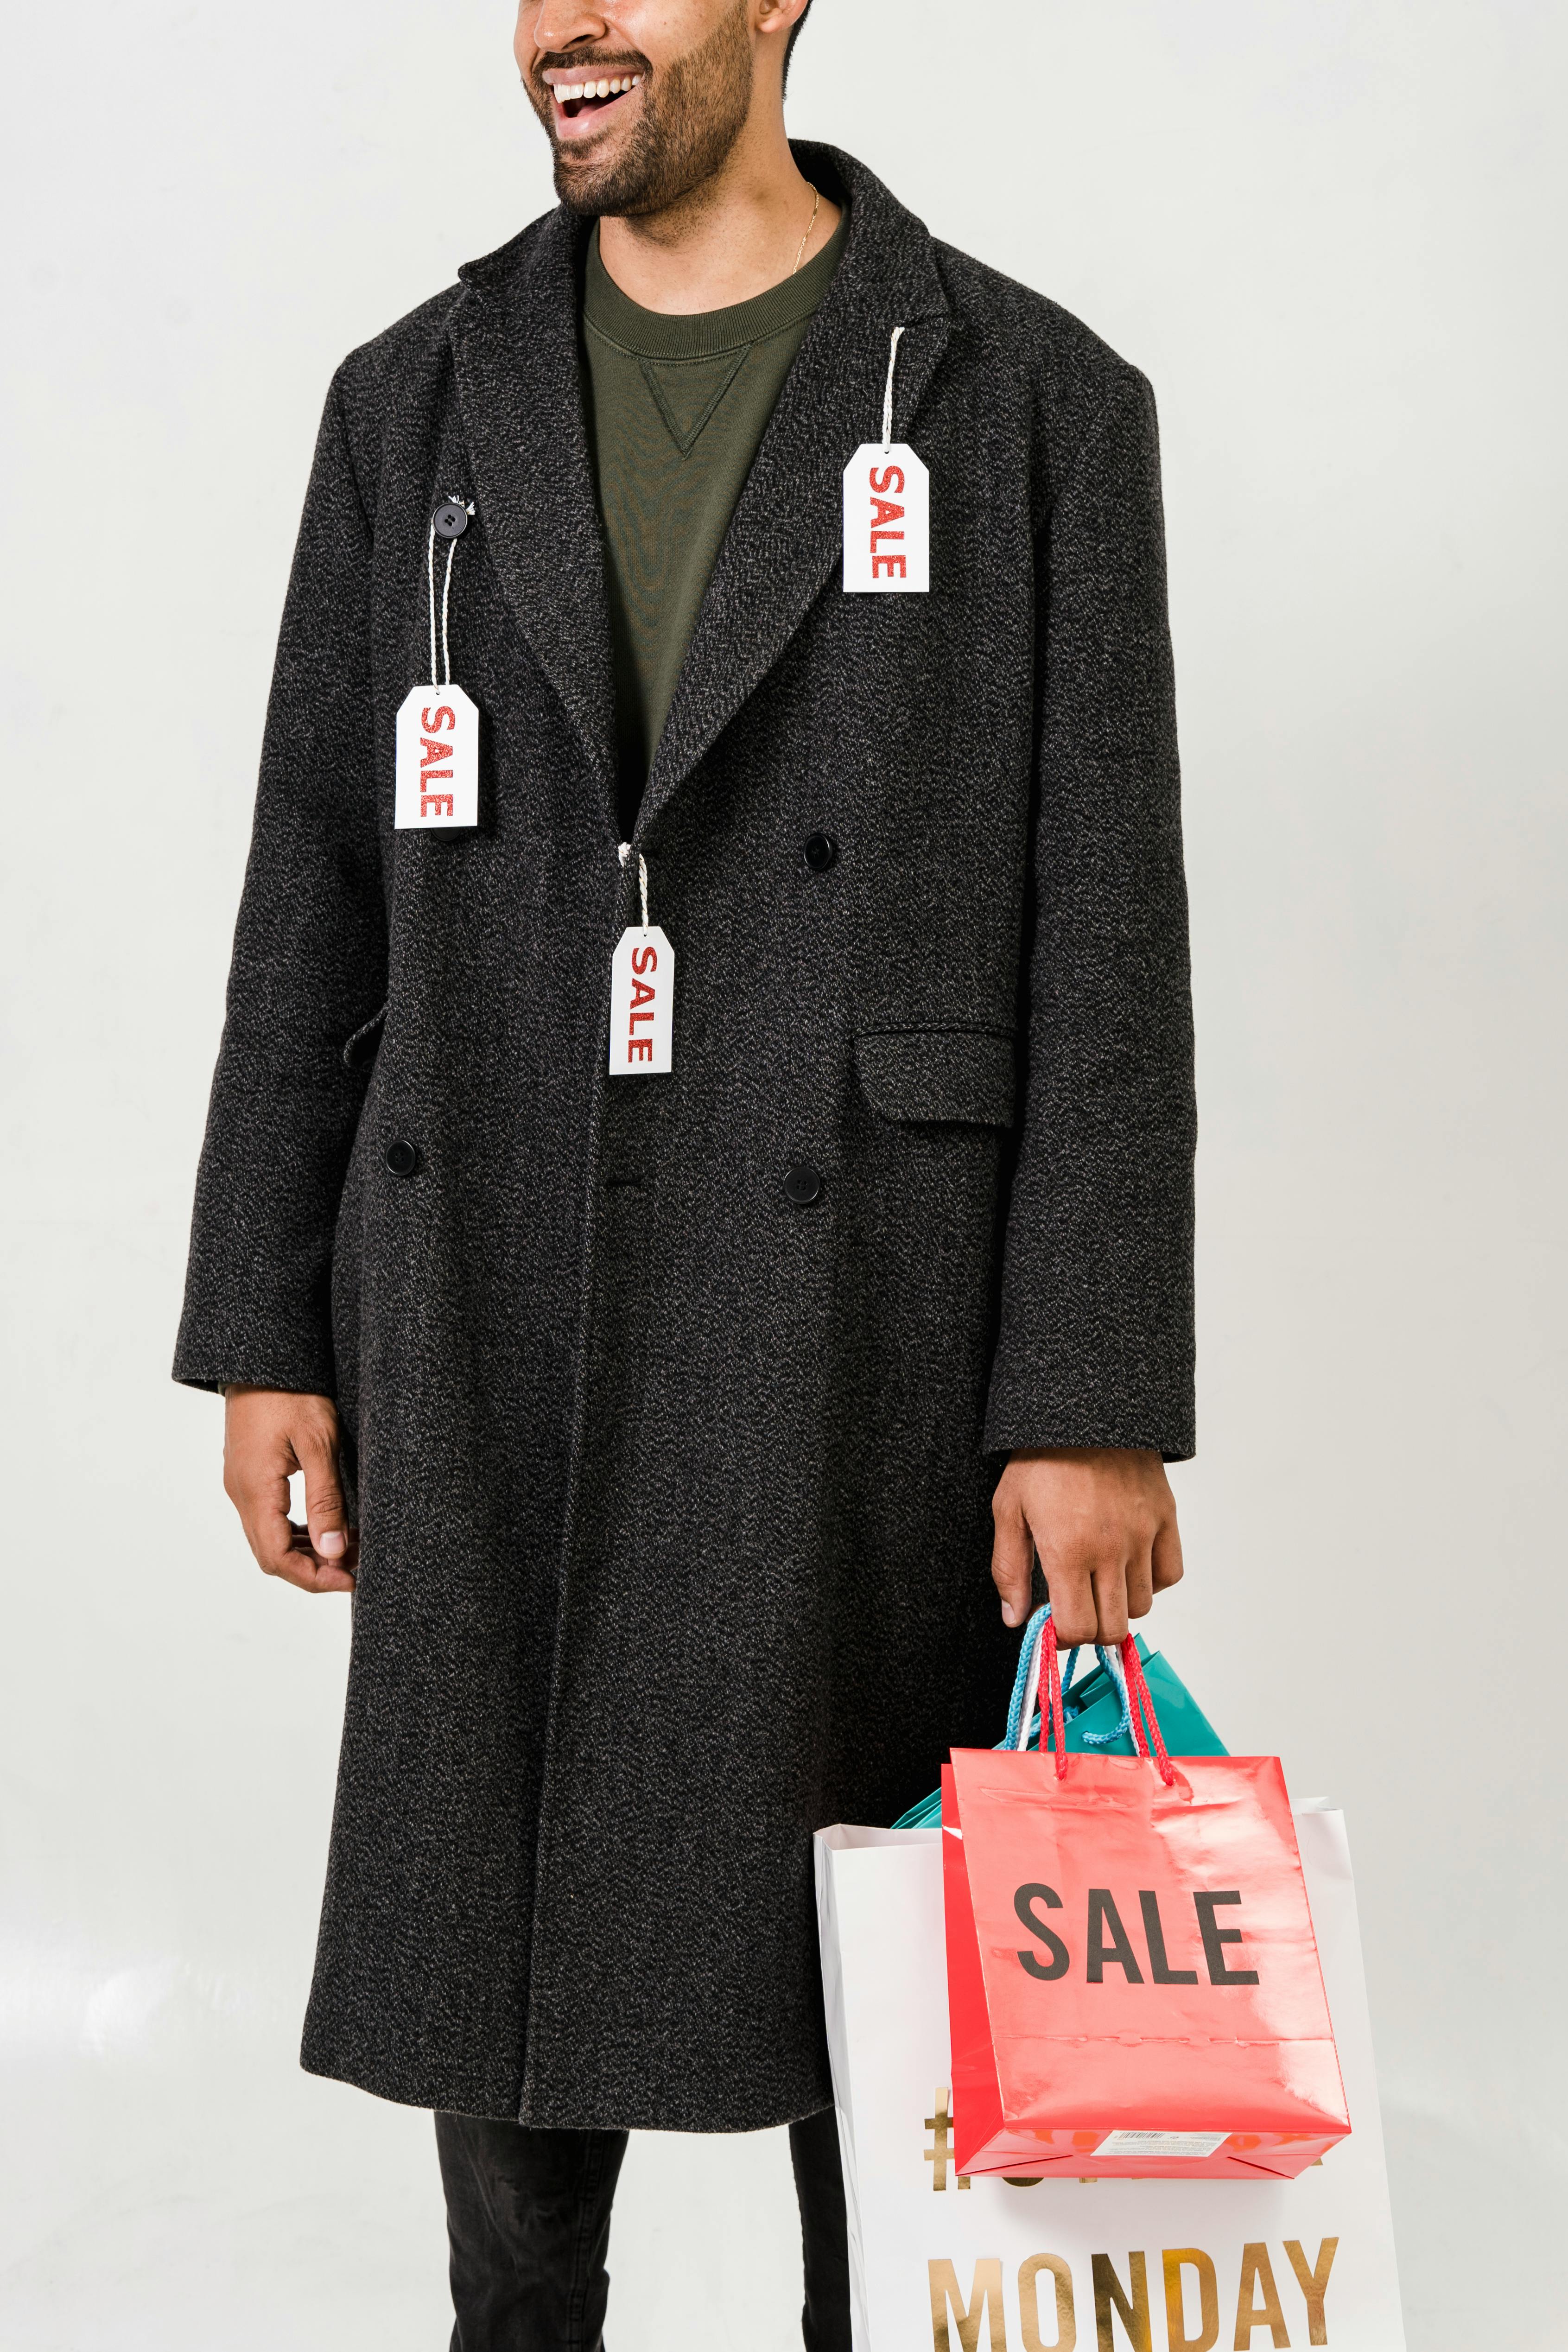 man wearing gray coat with sale tags